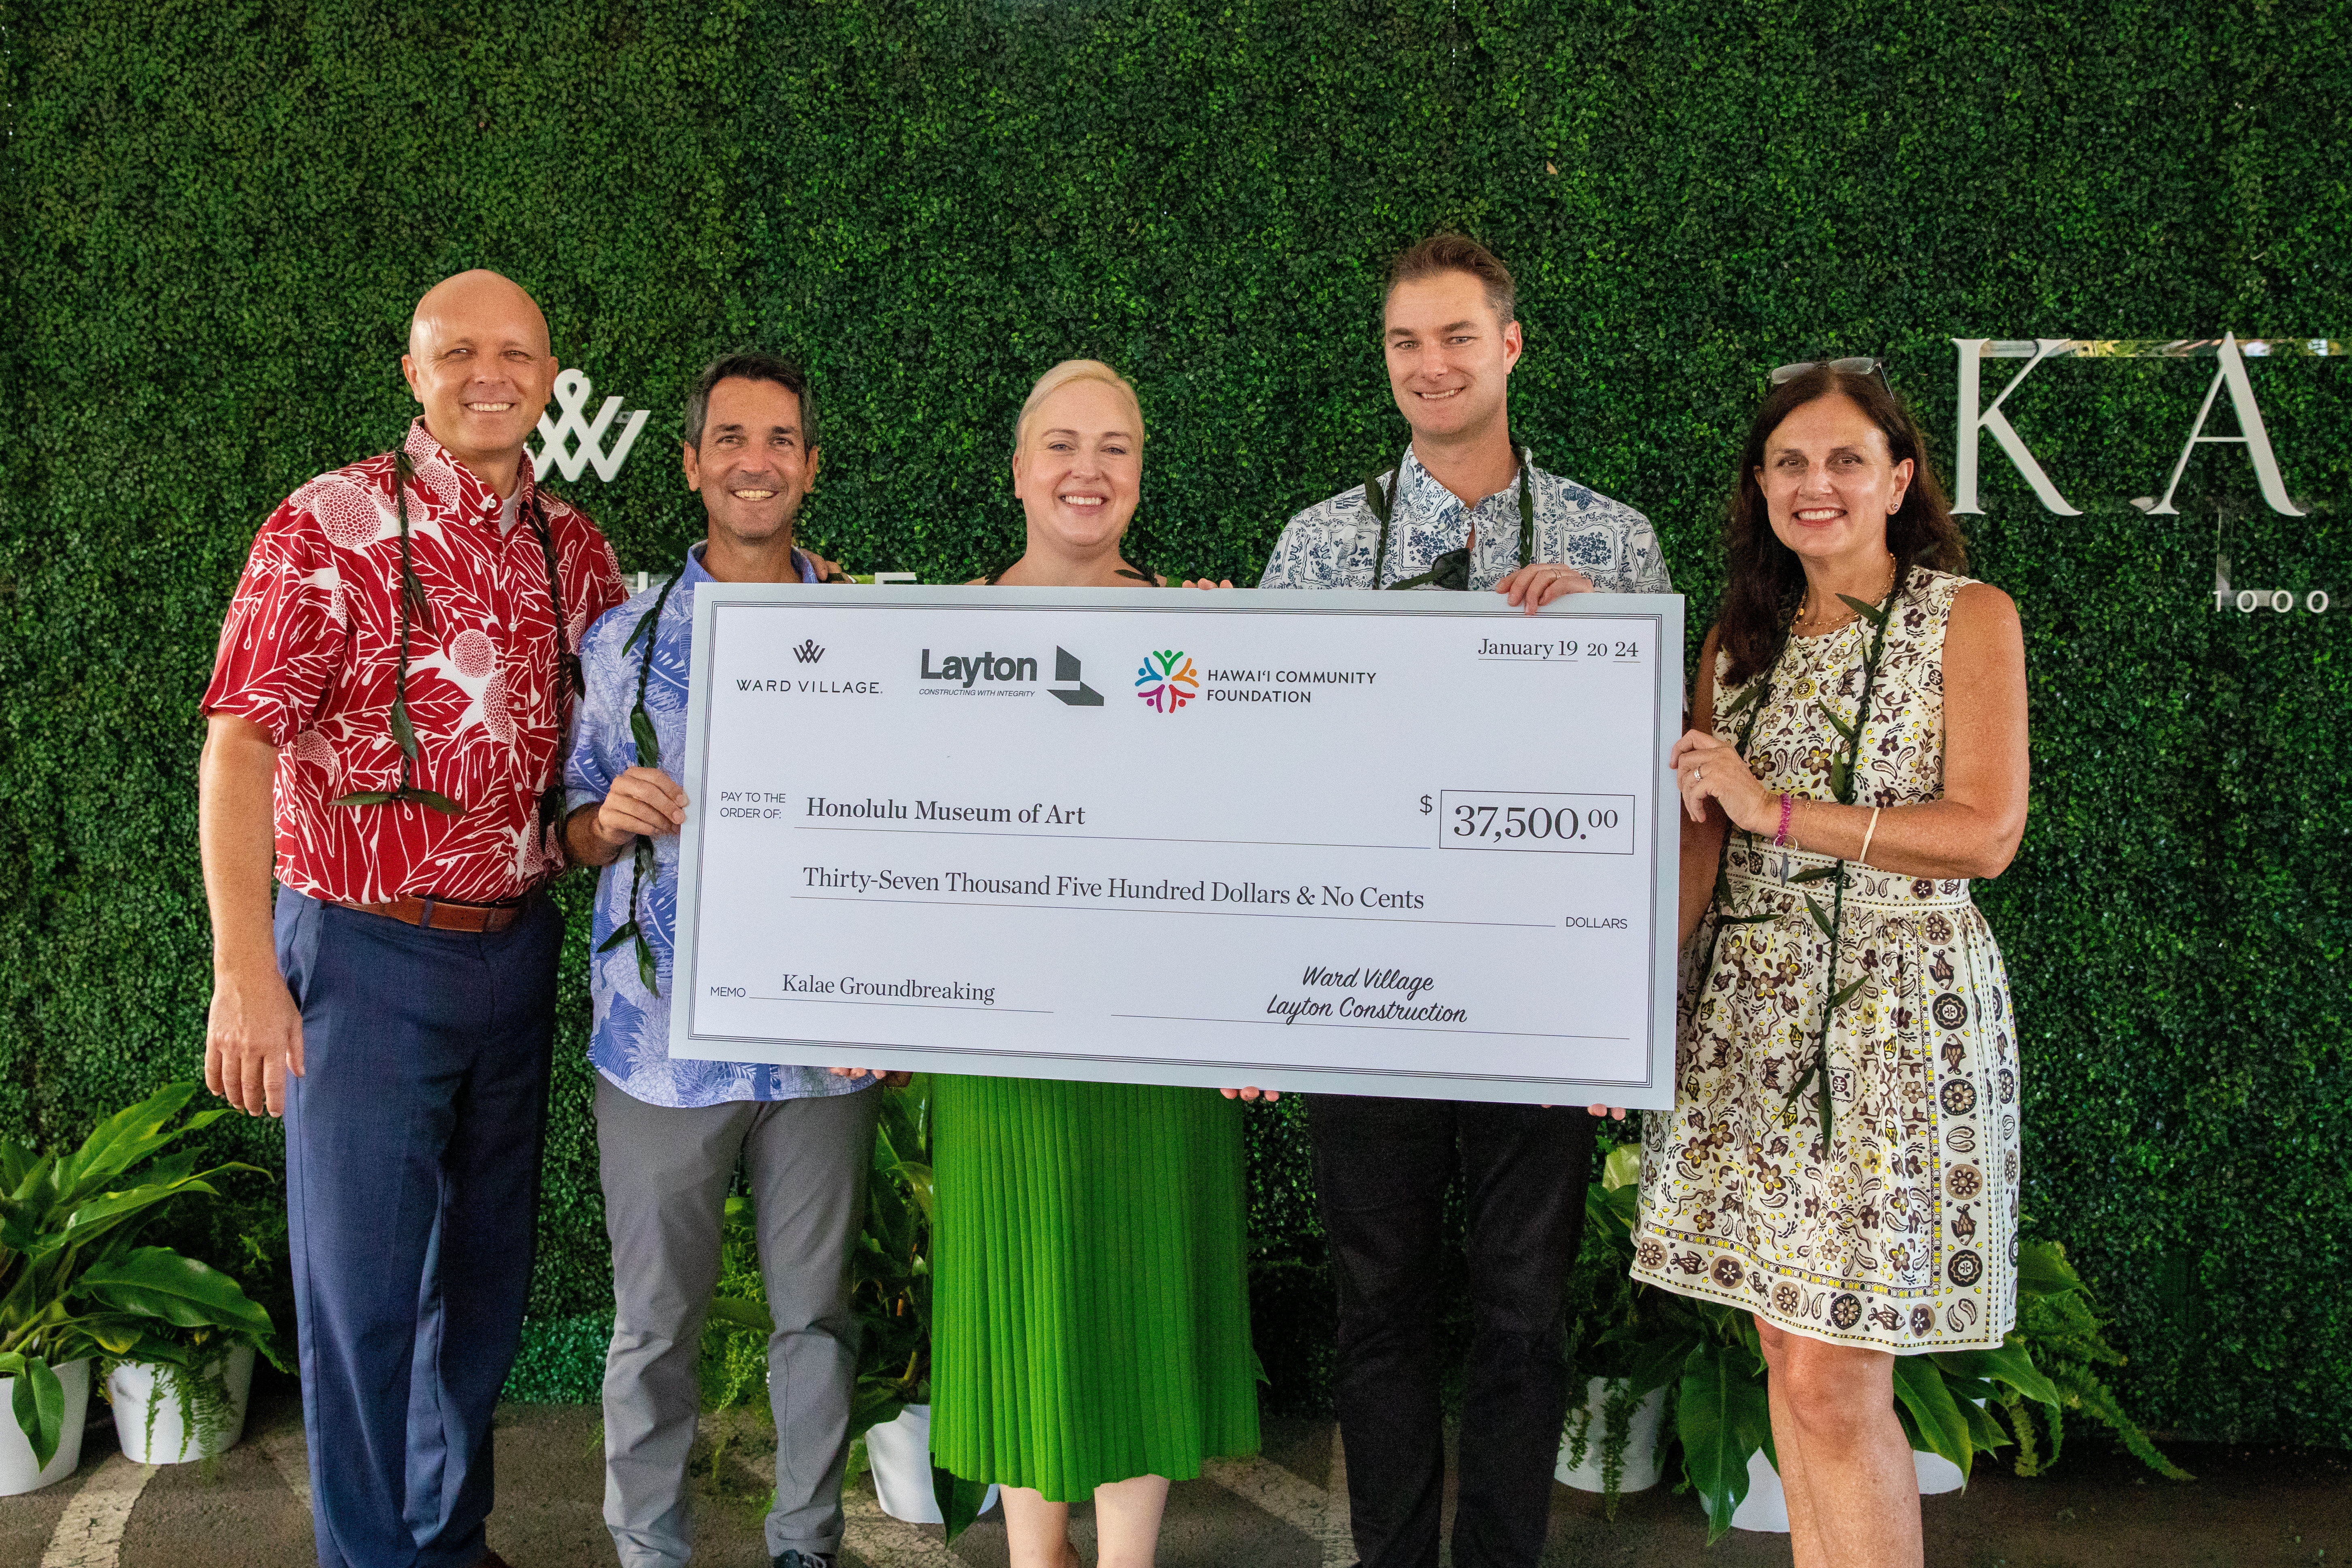 Ward Village marked Kalae’s development milestone with a $37,000 donation to the Honolulu Museum of Art.